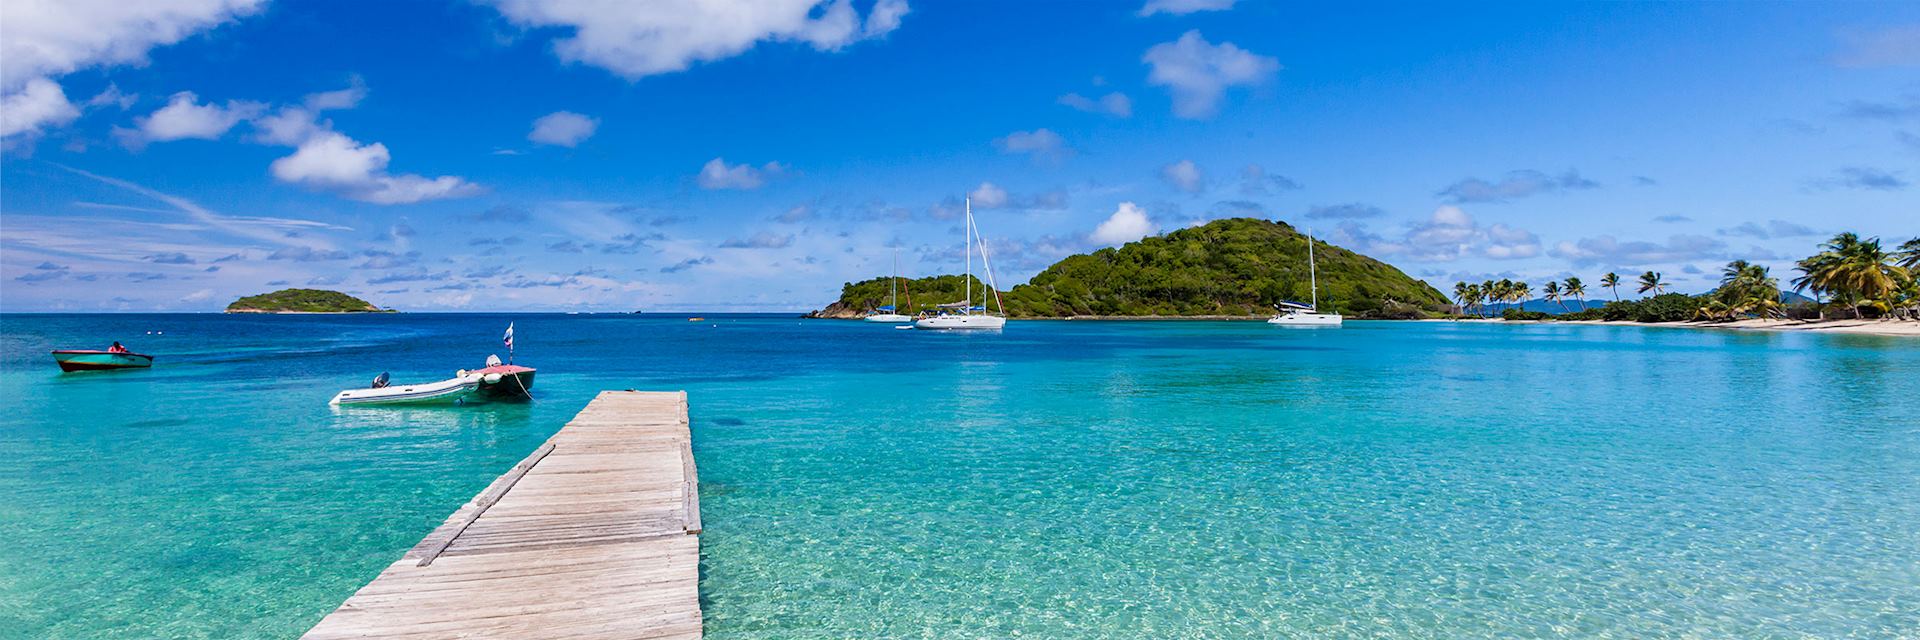 Holidays to st vincent and the grenadines.